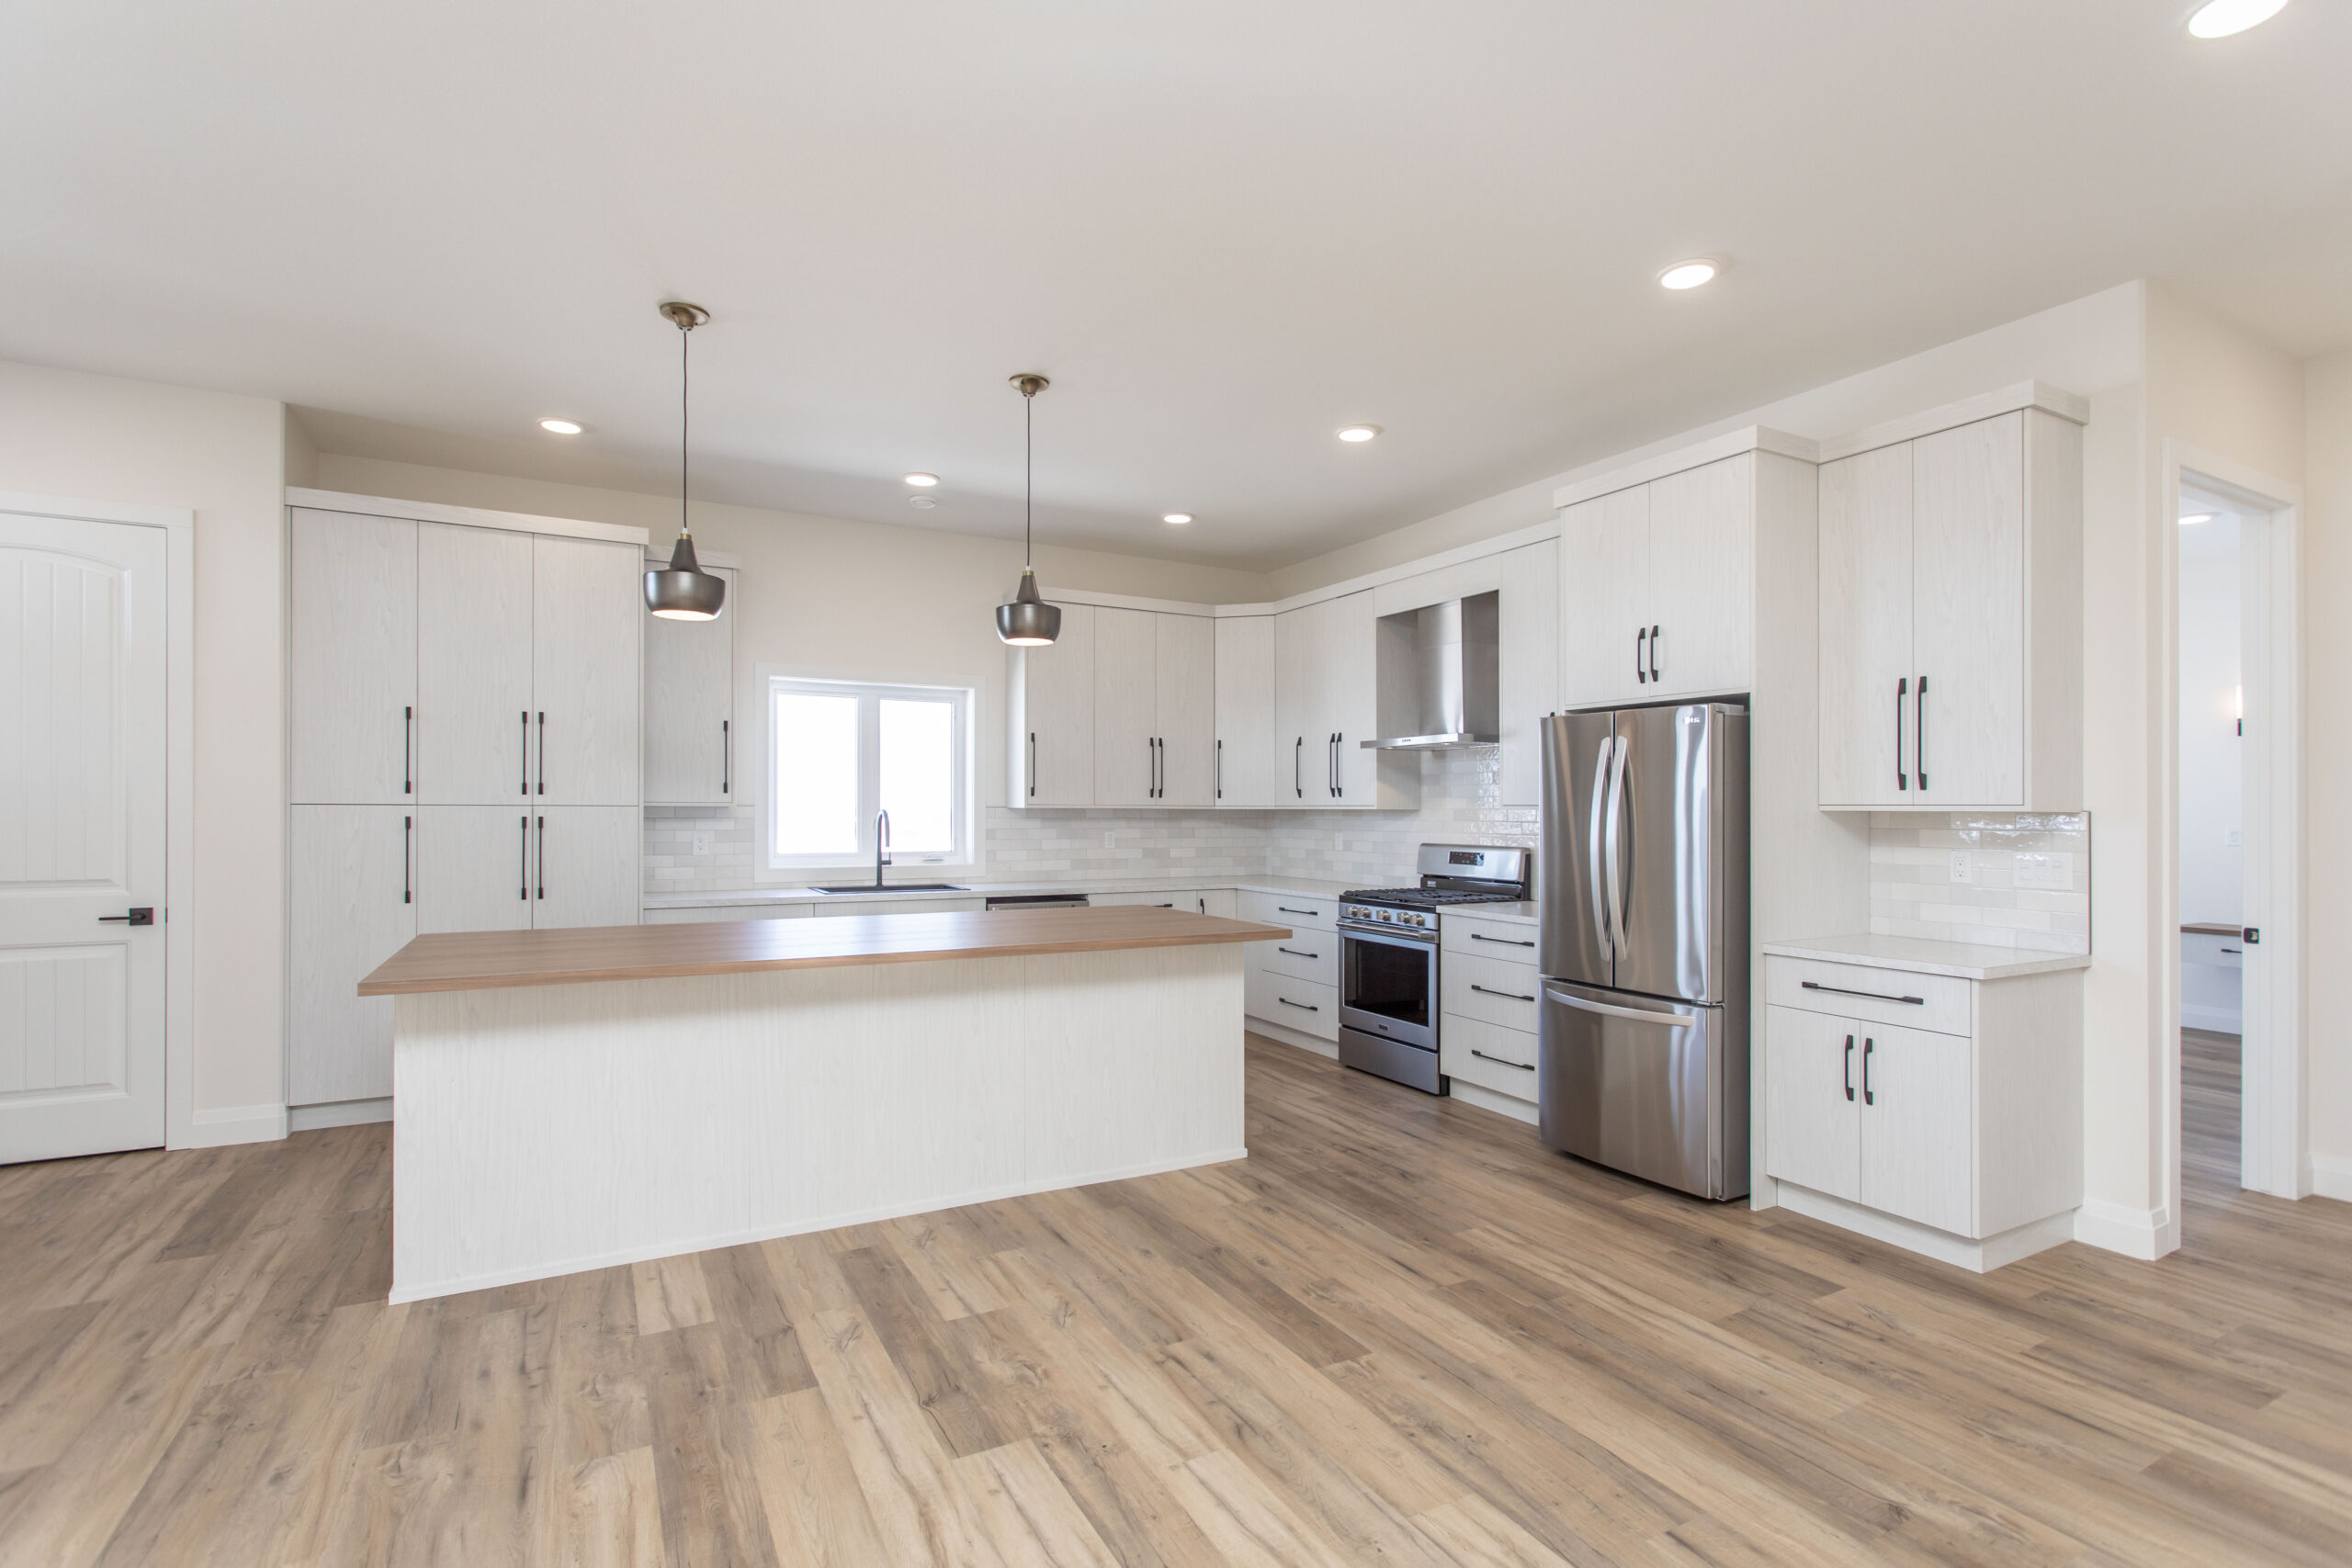 white and wood kitchen in barndominum build in Central Alberta